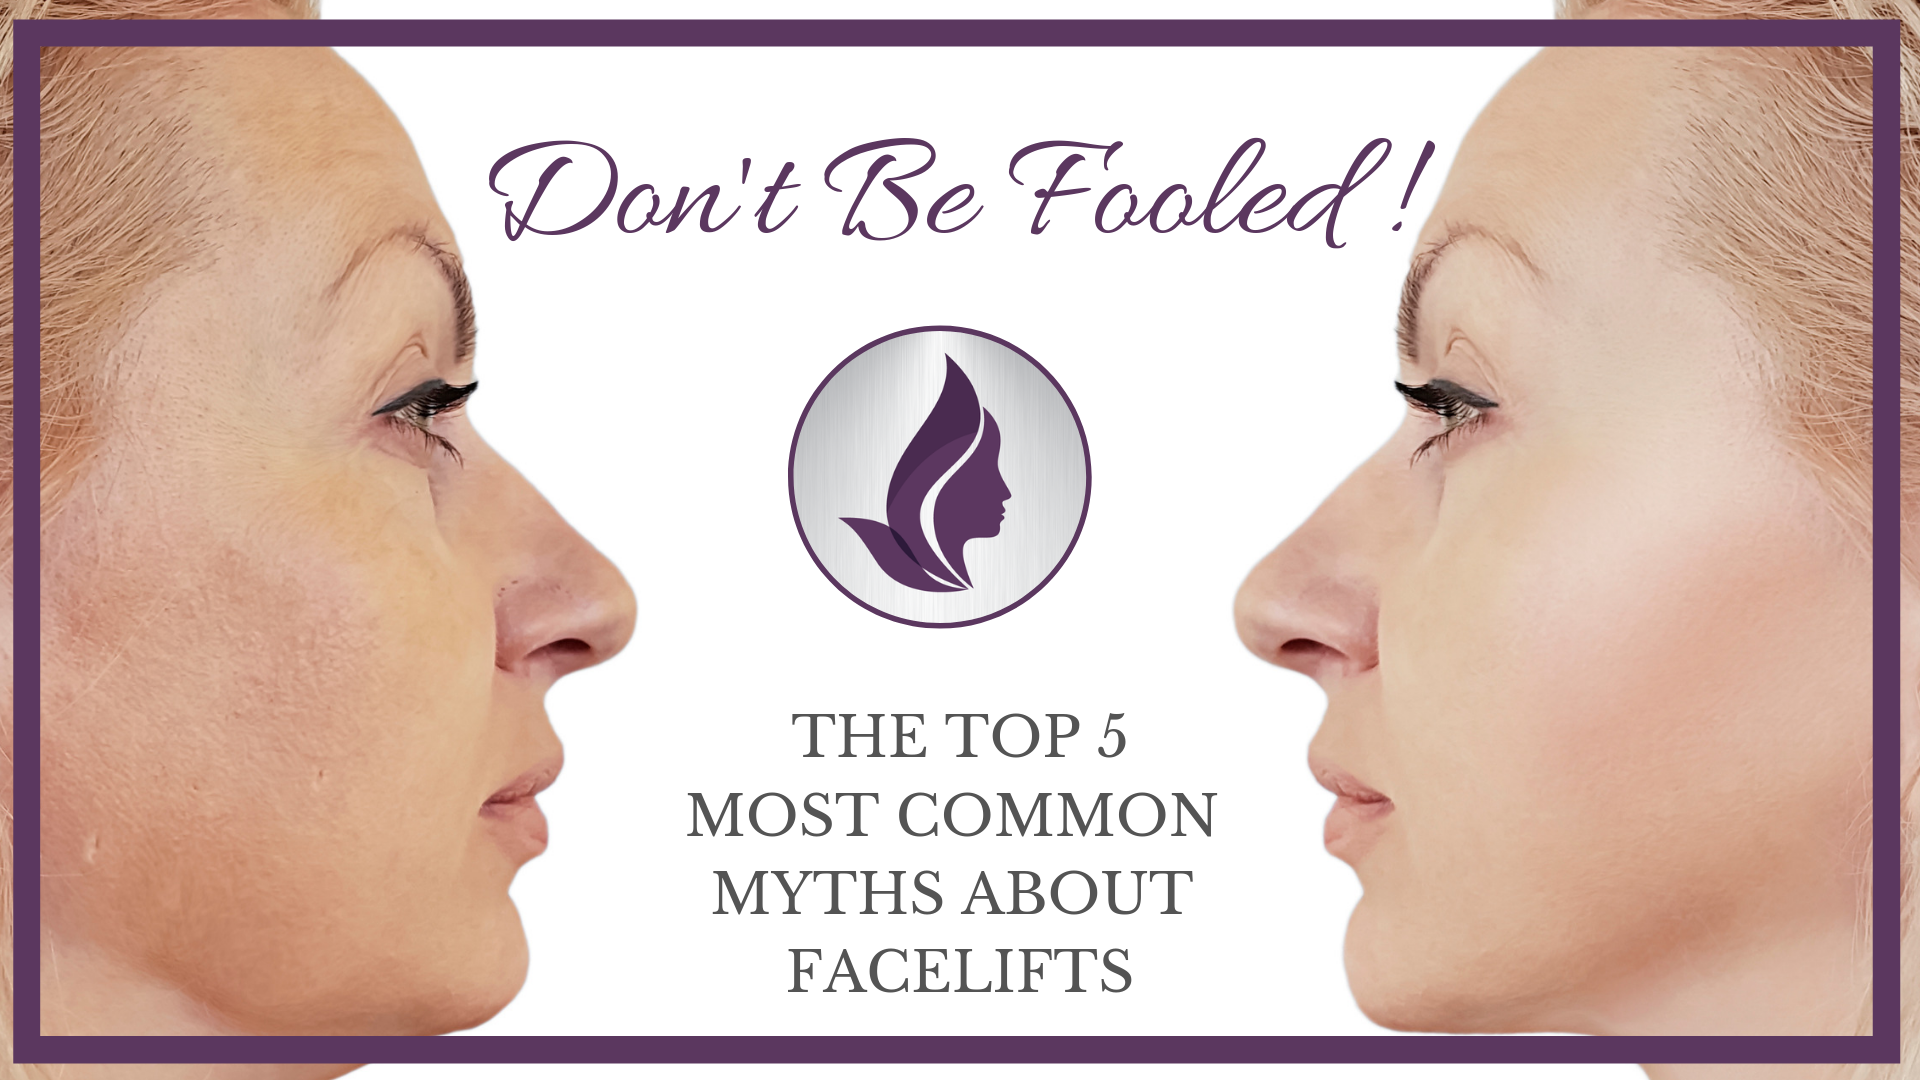 DON’T BE FOOLED! THE TOP 5 MOST COMMON MYTHS ABOUT FACELIFTS